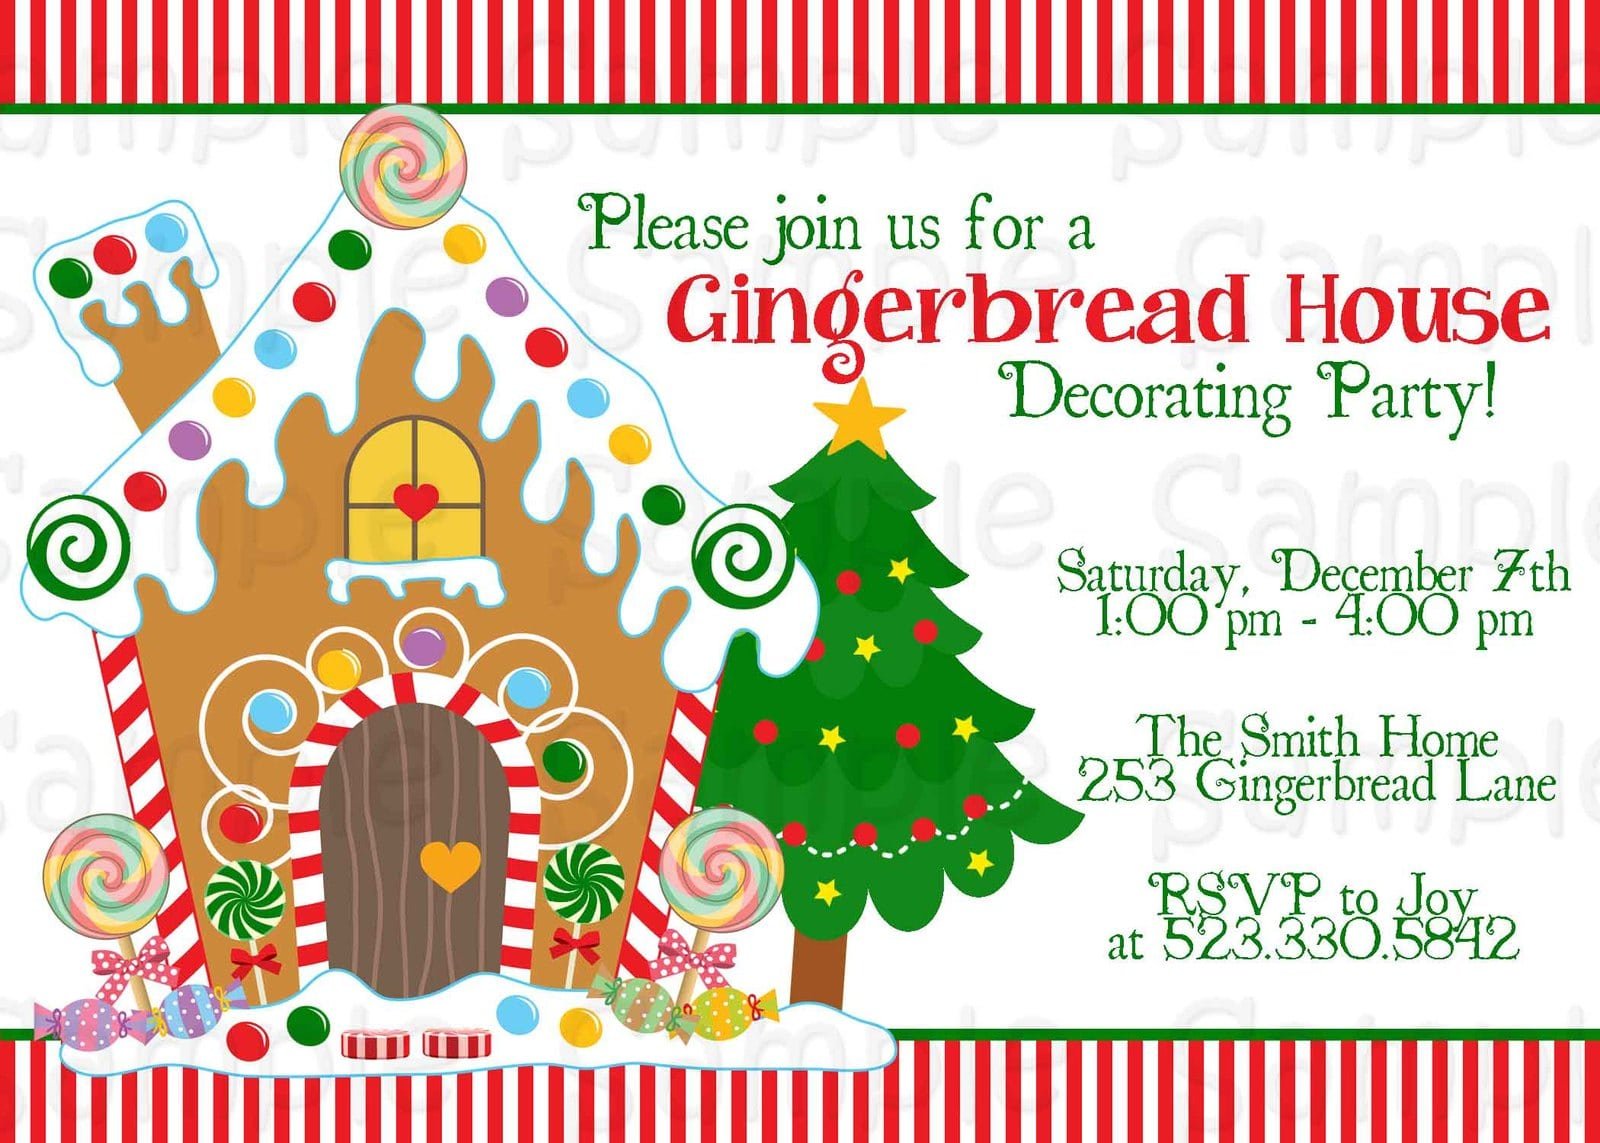 Gingerbread House Decorating Party Invitations